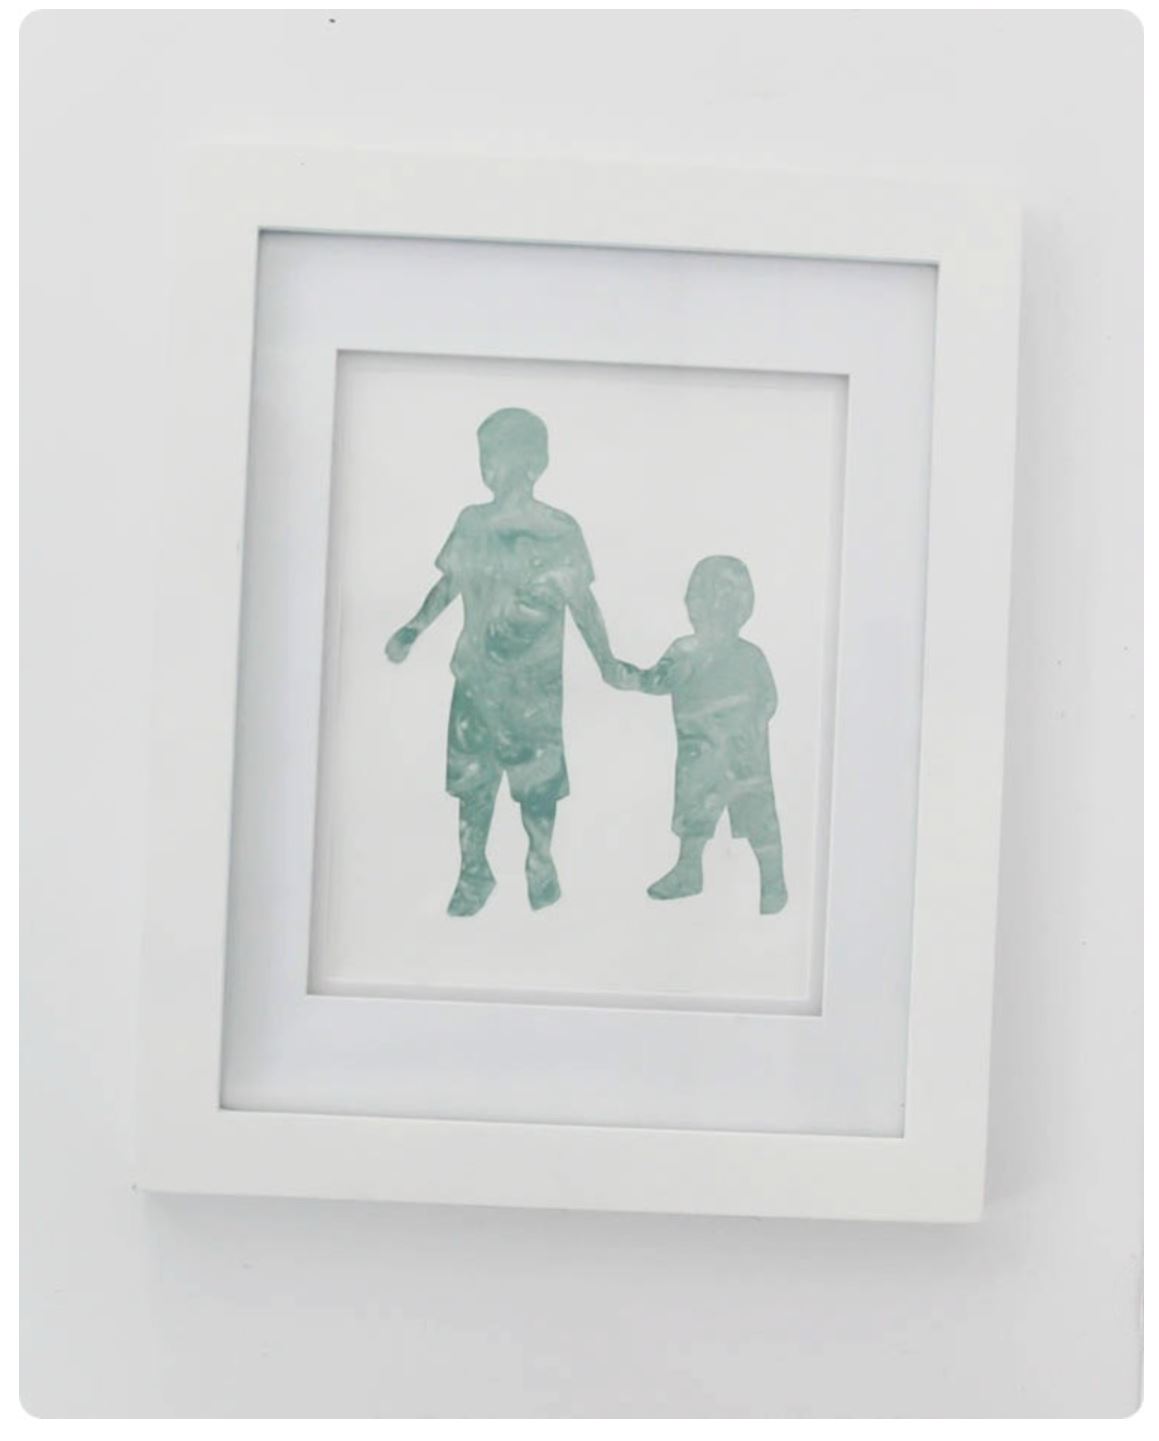 A framed silhouette print of two children holding hands.